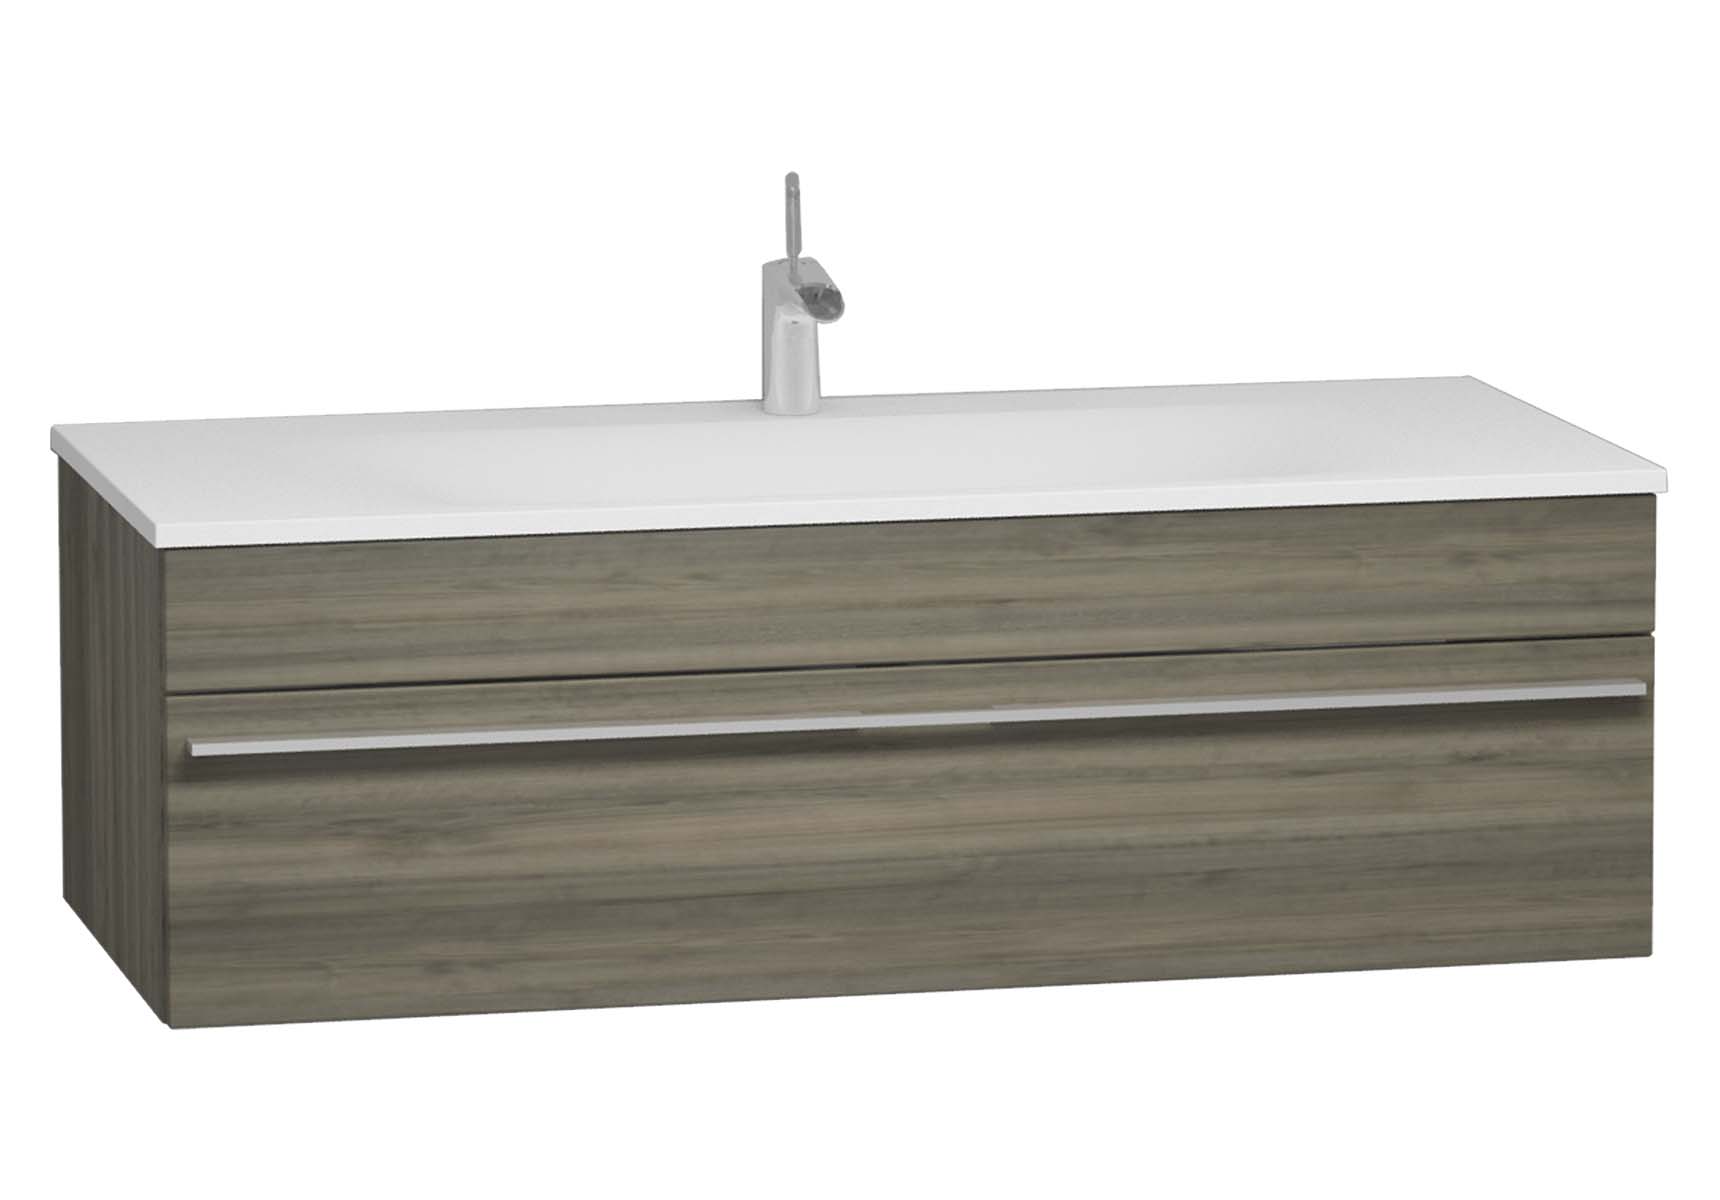 System Infinit Washbasin Unit 120 cm, Soft Moulded with Sink